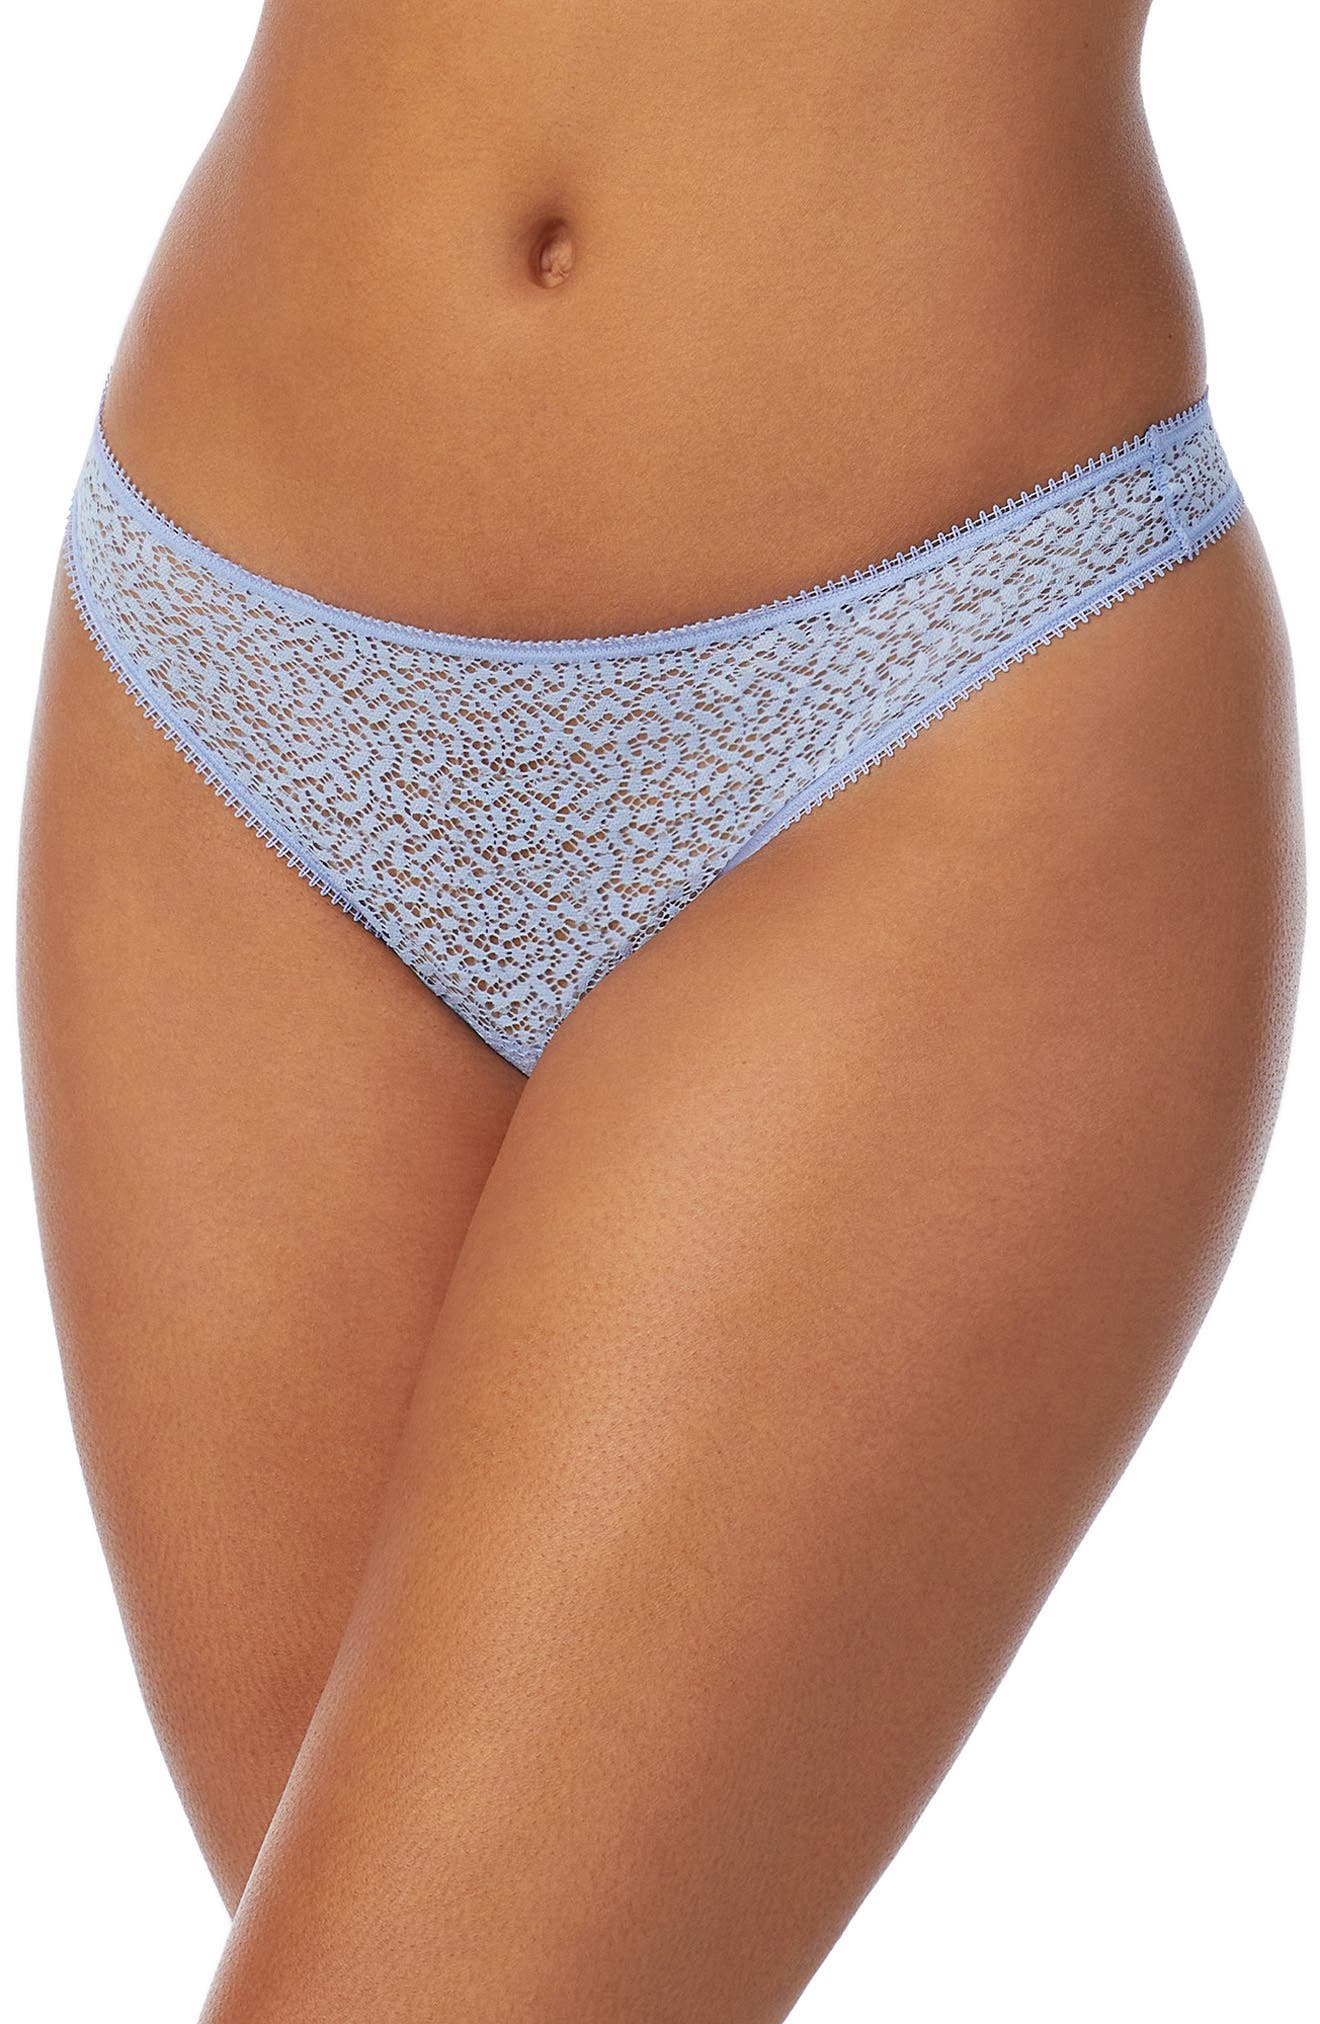 DKNY Modern Lace Thong in Serenity